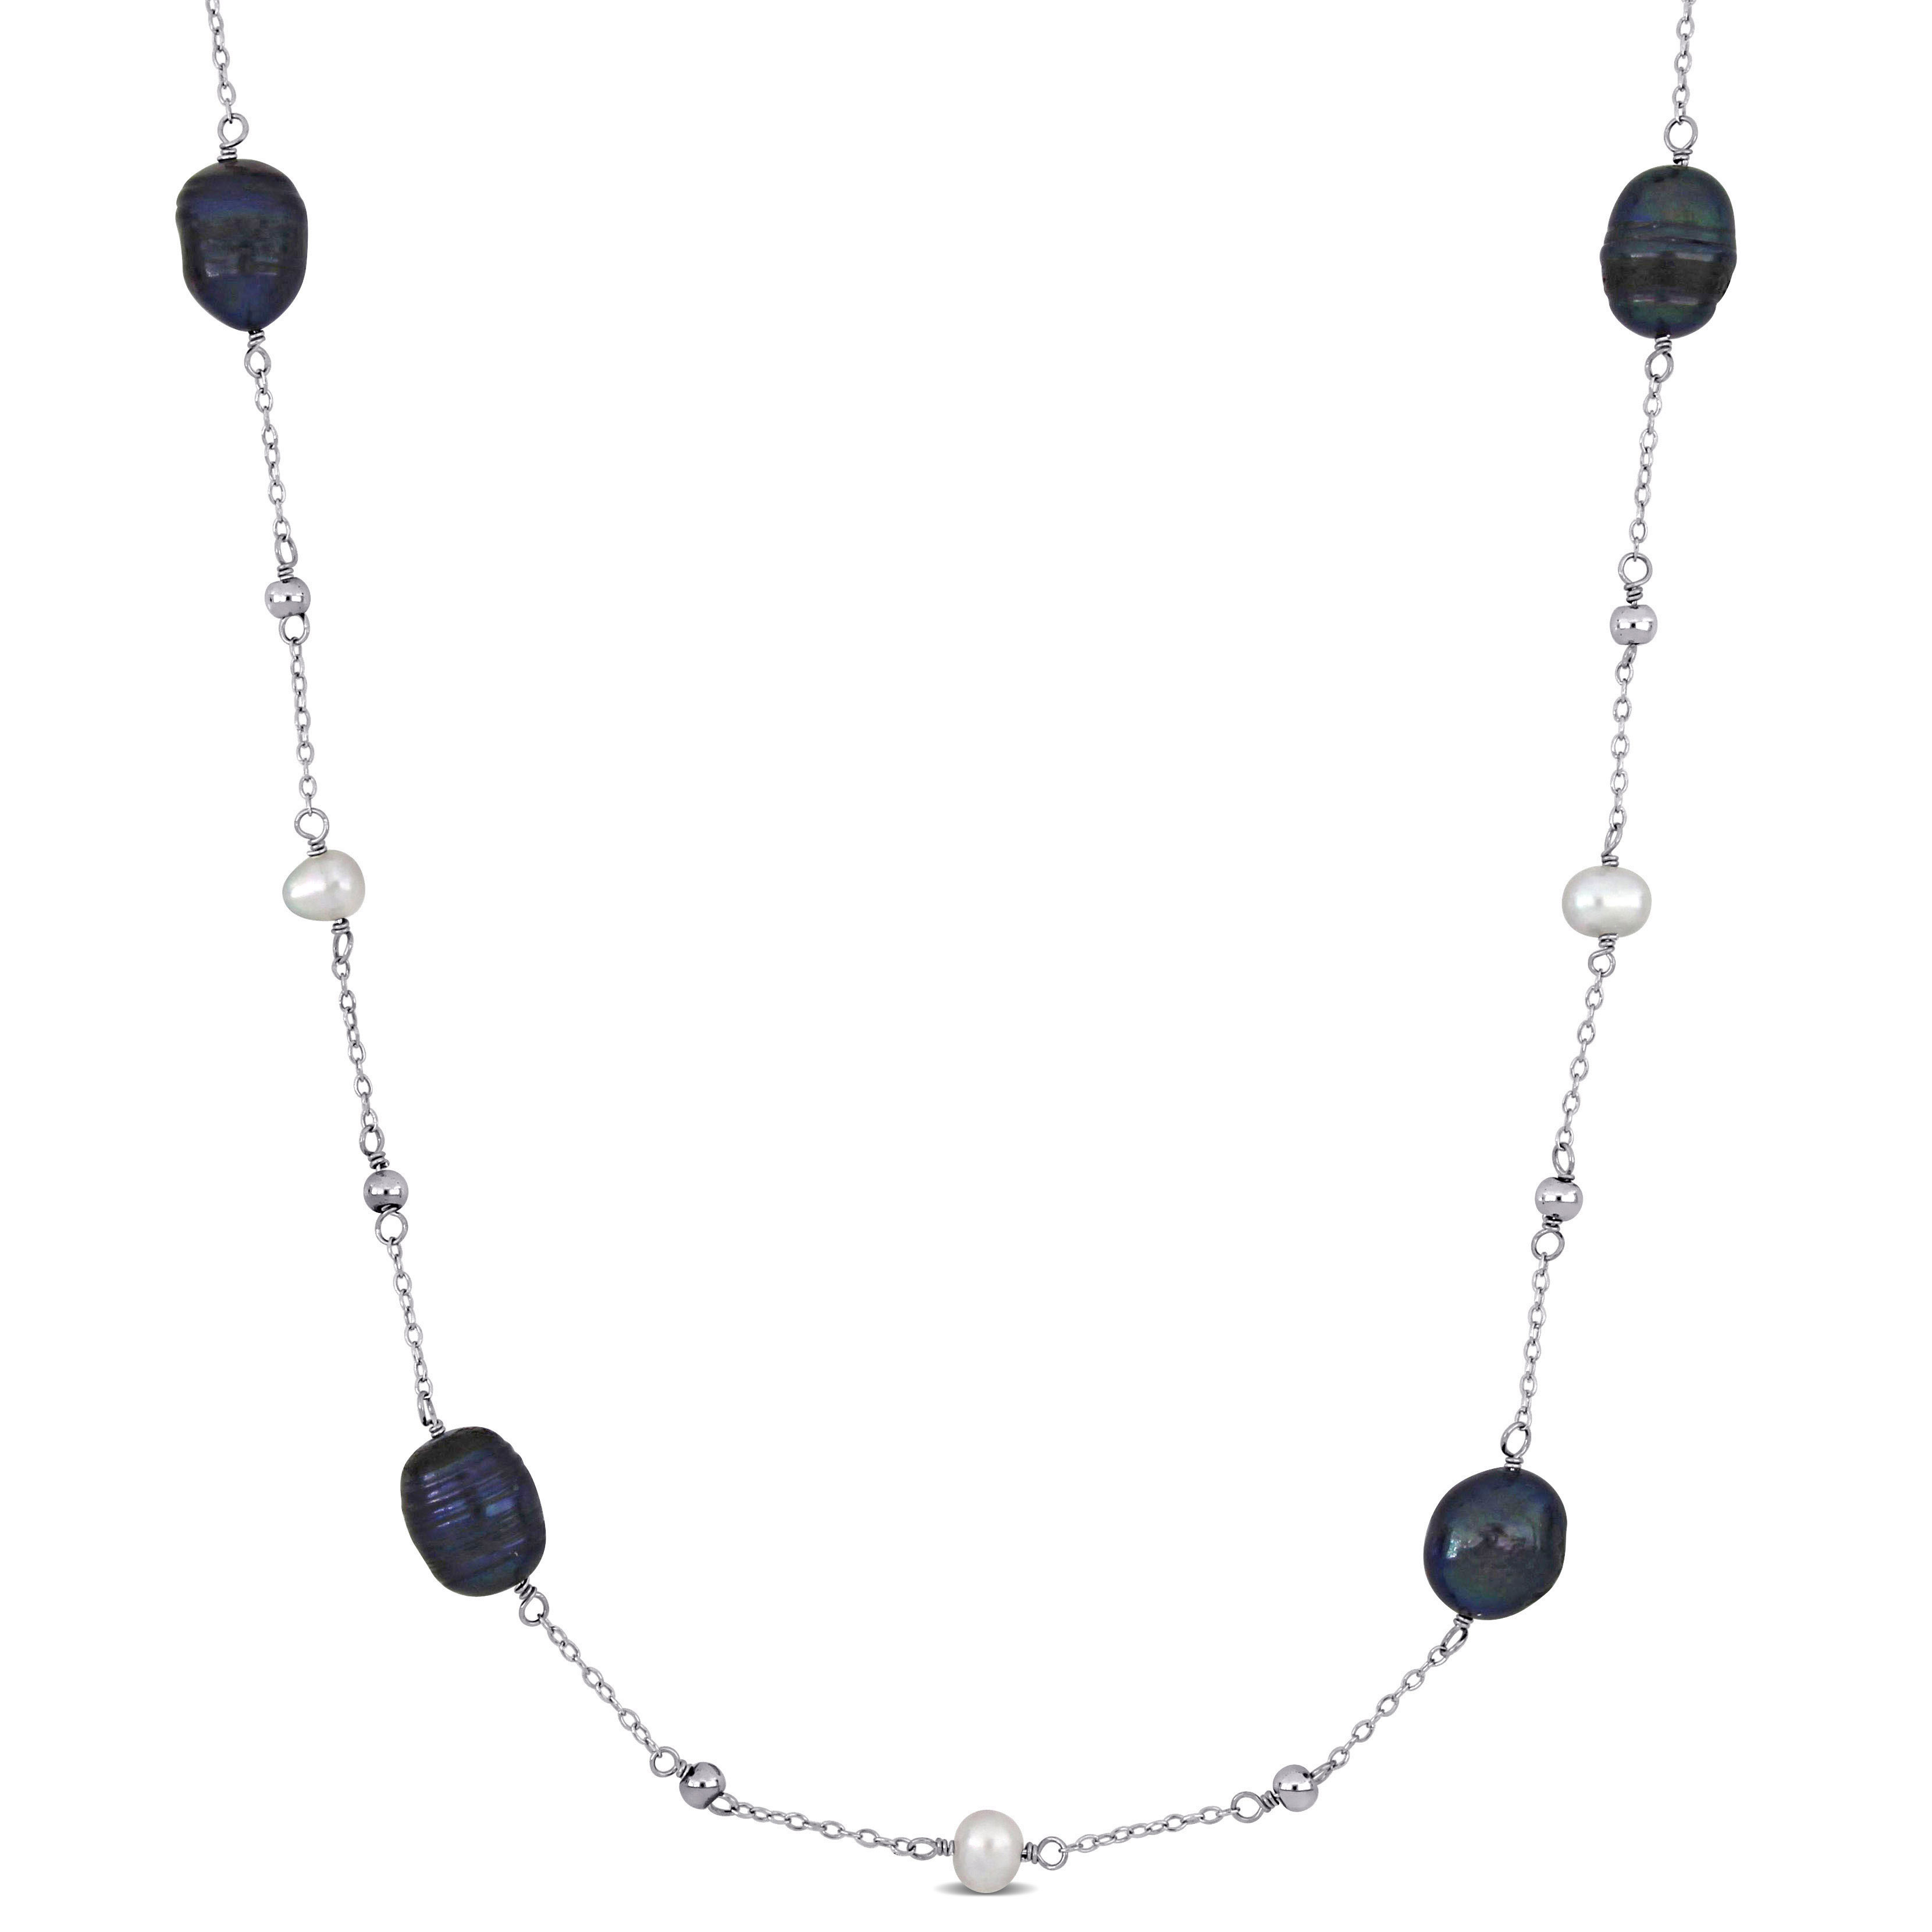 5-12 MM Black and White Cultured Freshwater Pearls and Hematite Beads Endless Station Necklace in Sterling Silver - 40 in.